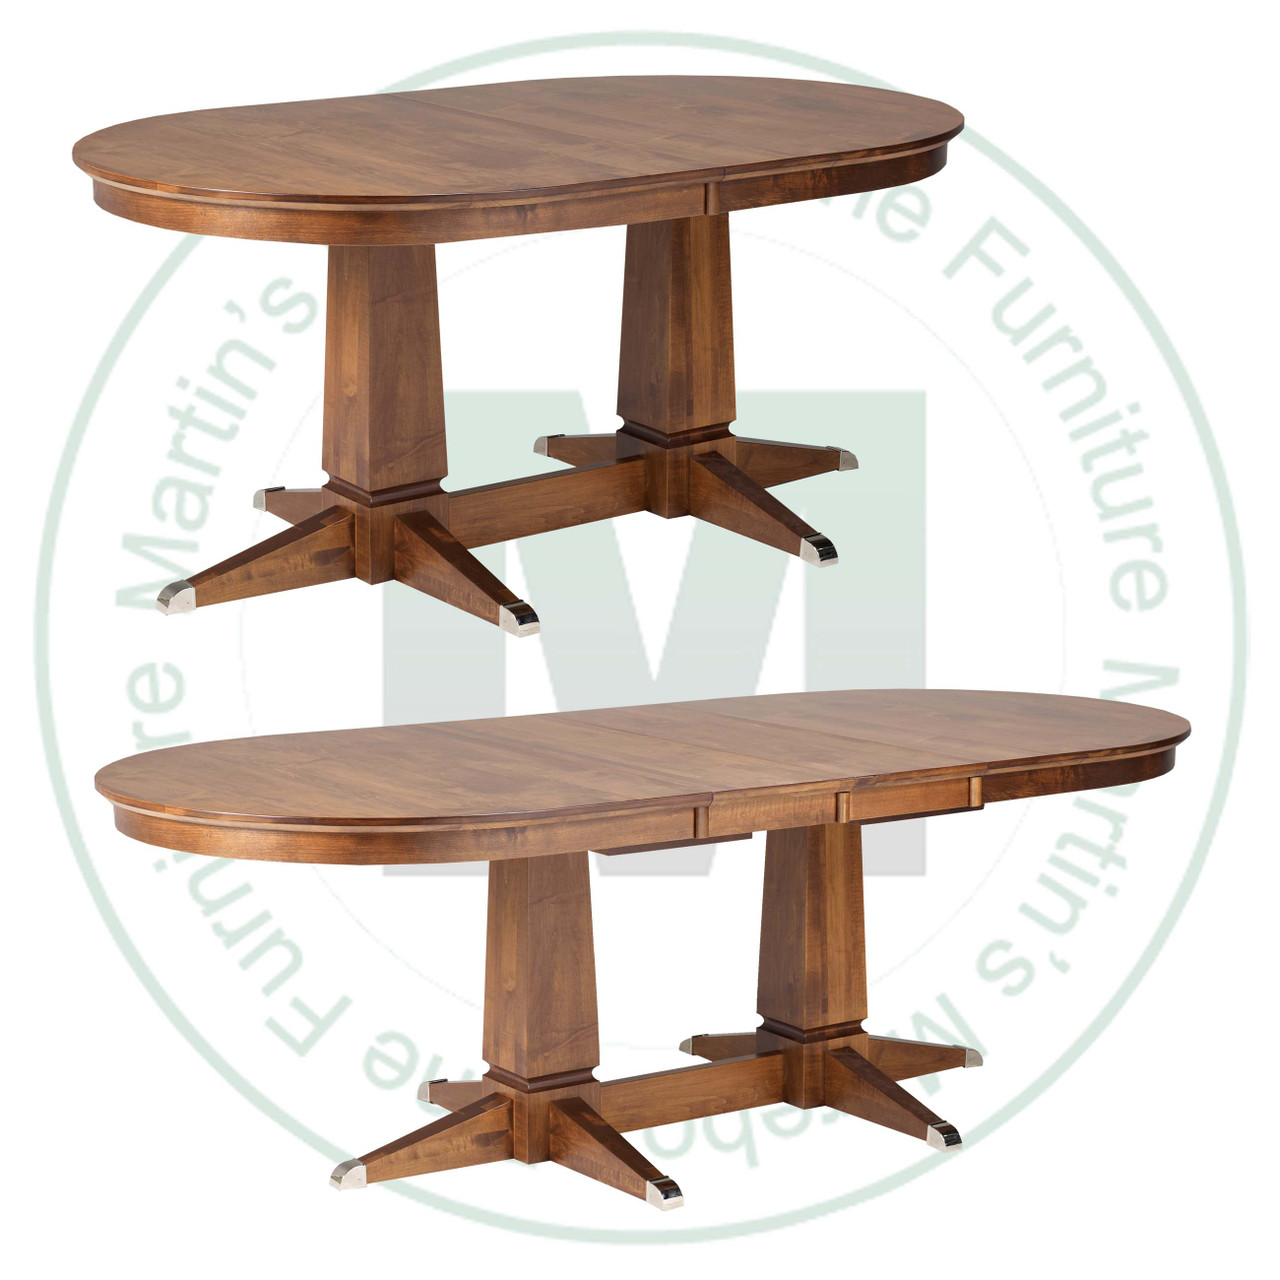 Wormy Maple Sweden Double Pedestal Table 42''D x 66''W x 30''H With 2 - 12'' Leaves